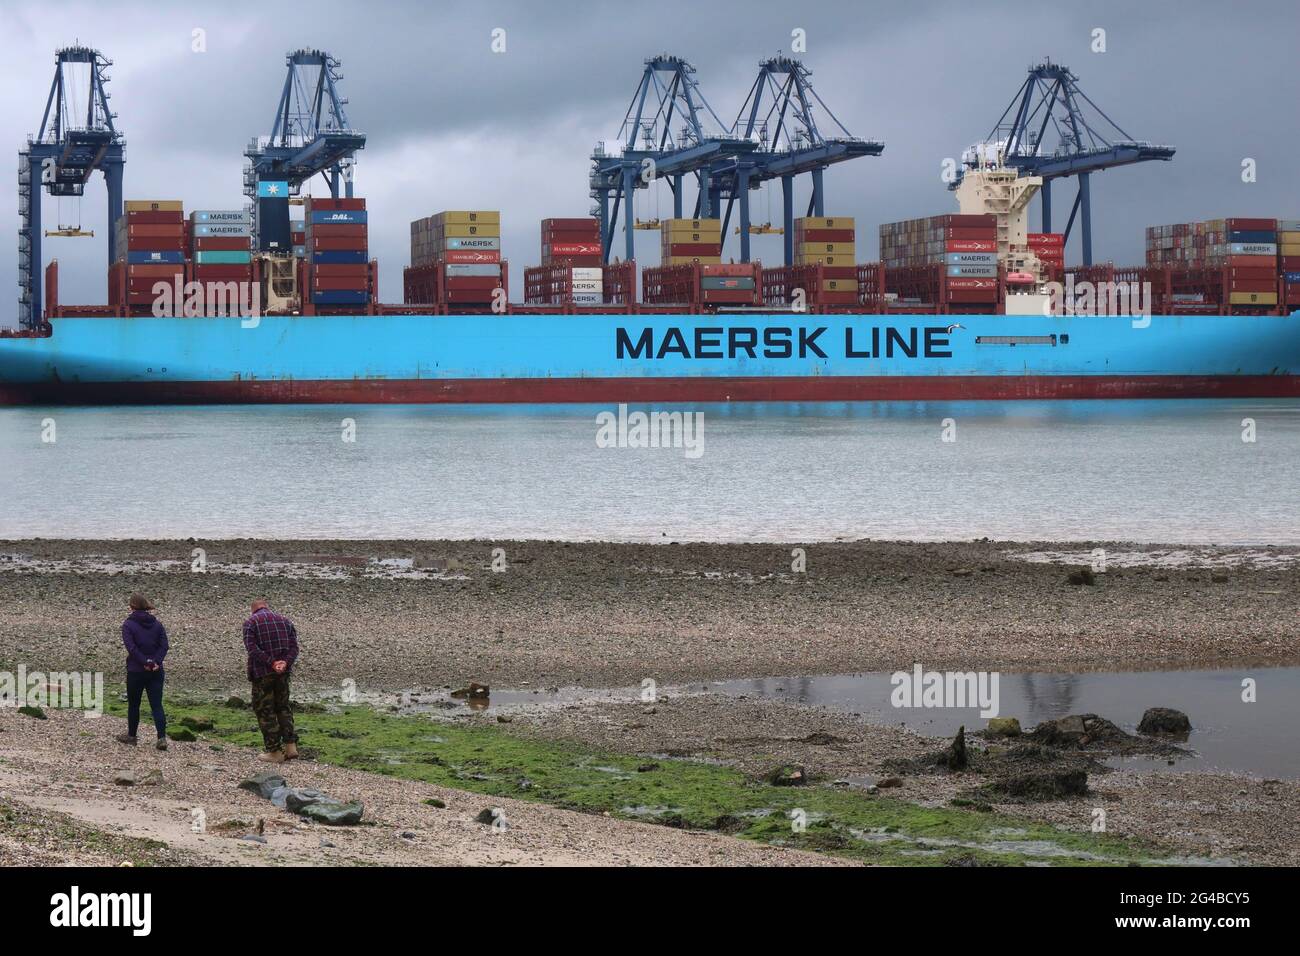 Shotley Gate, Suffolk - 20 June 2021: Maersk Line Herrera cargo container ship docked in the port of Felixstowe. People walking on Shotley beach in the foregound. Stock Photo